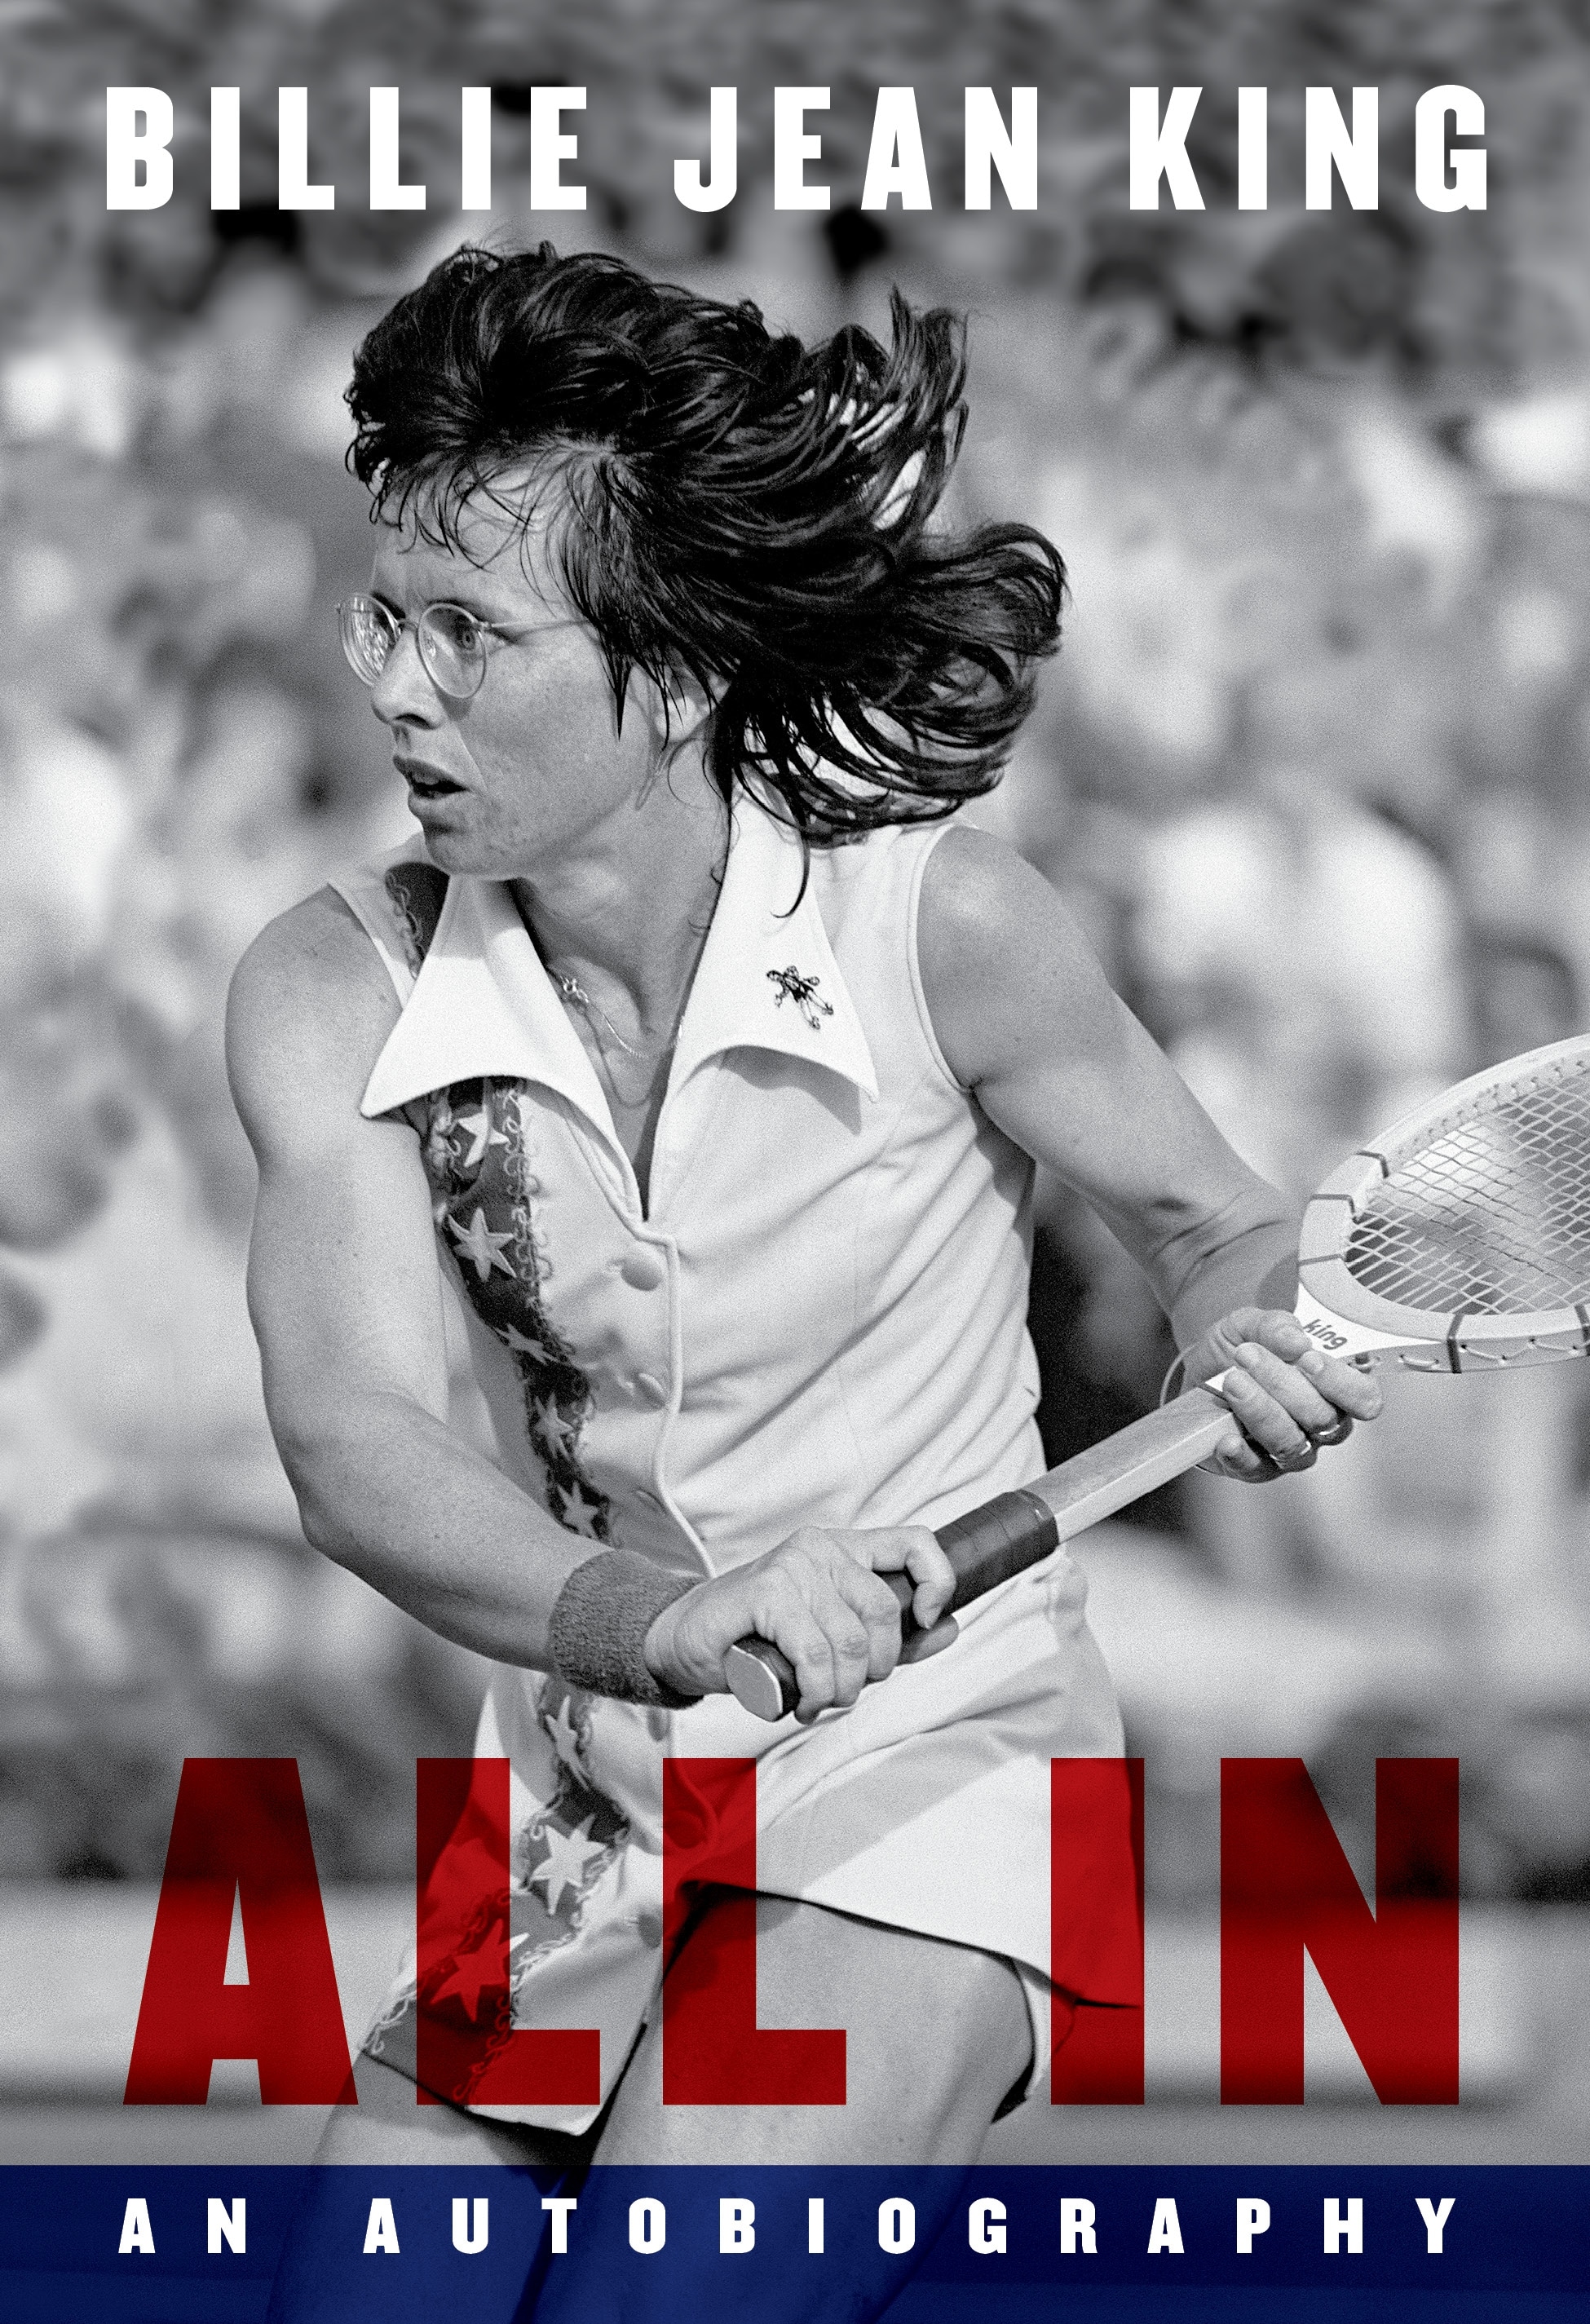 Book “All In” by Billie Jean King — September 9, 2021